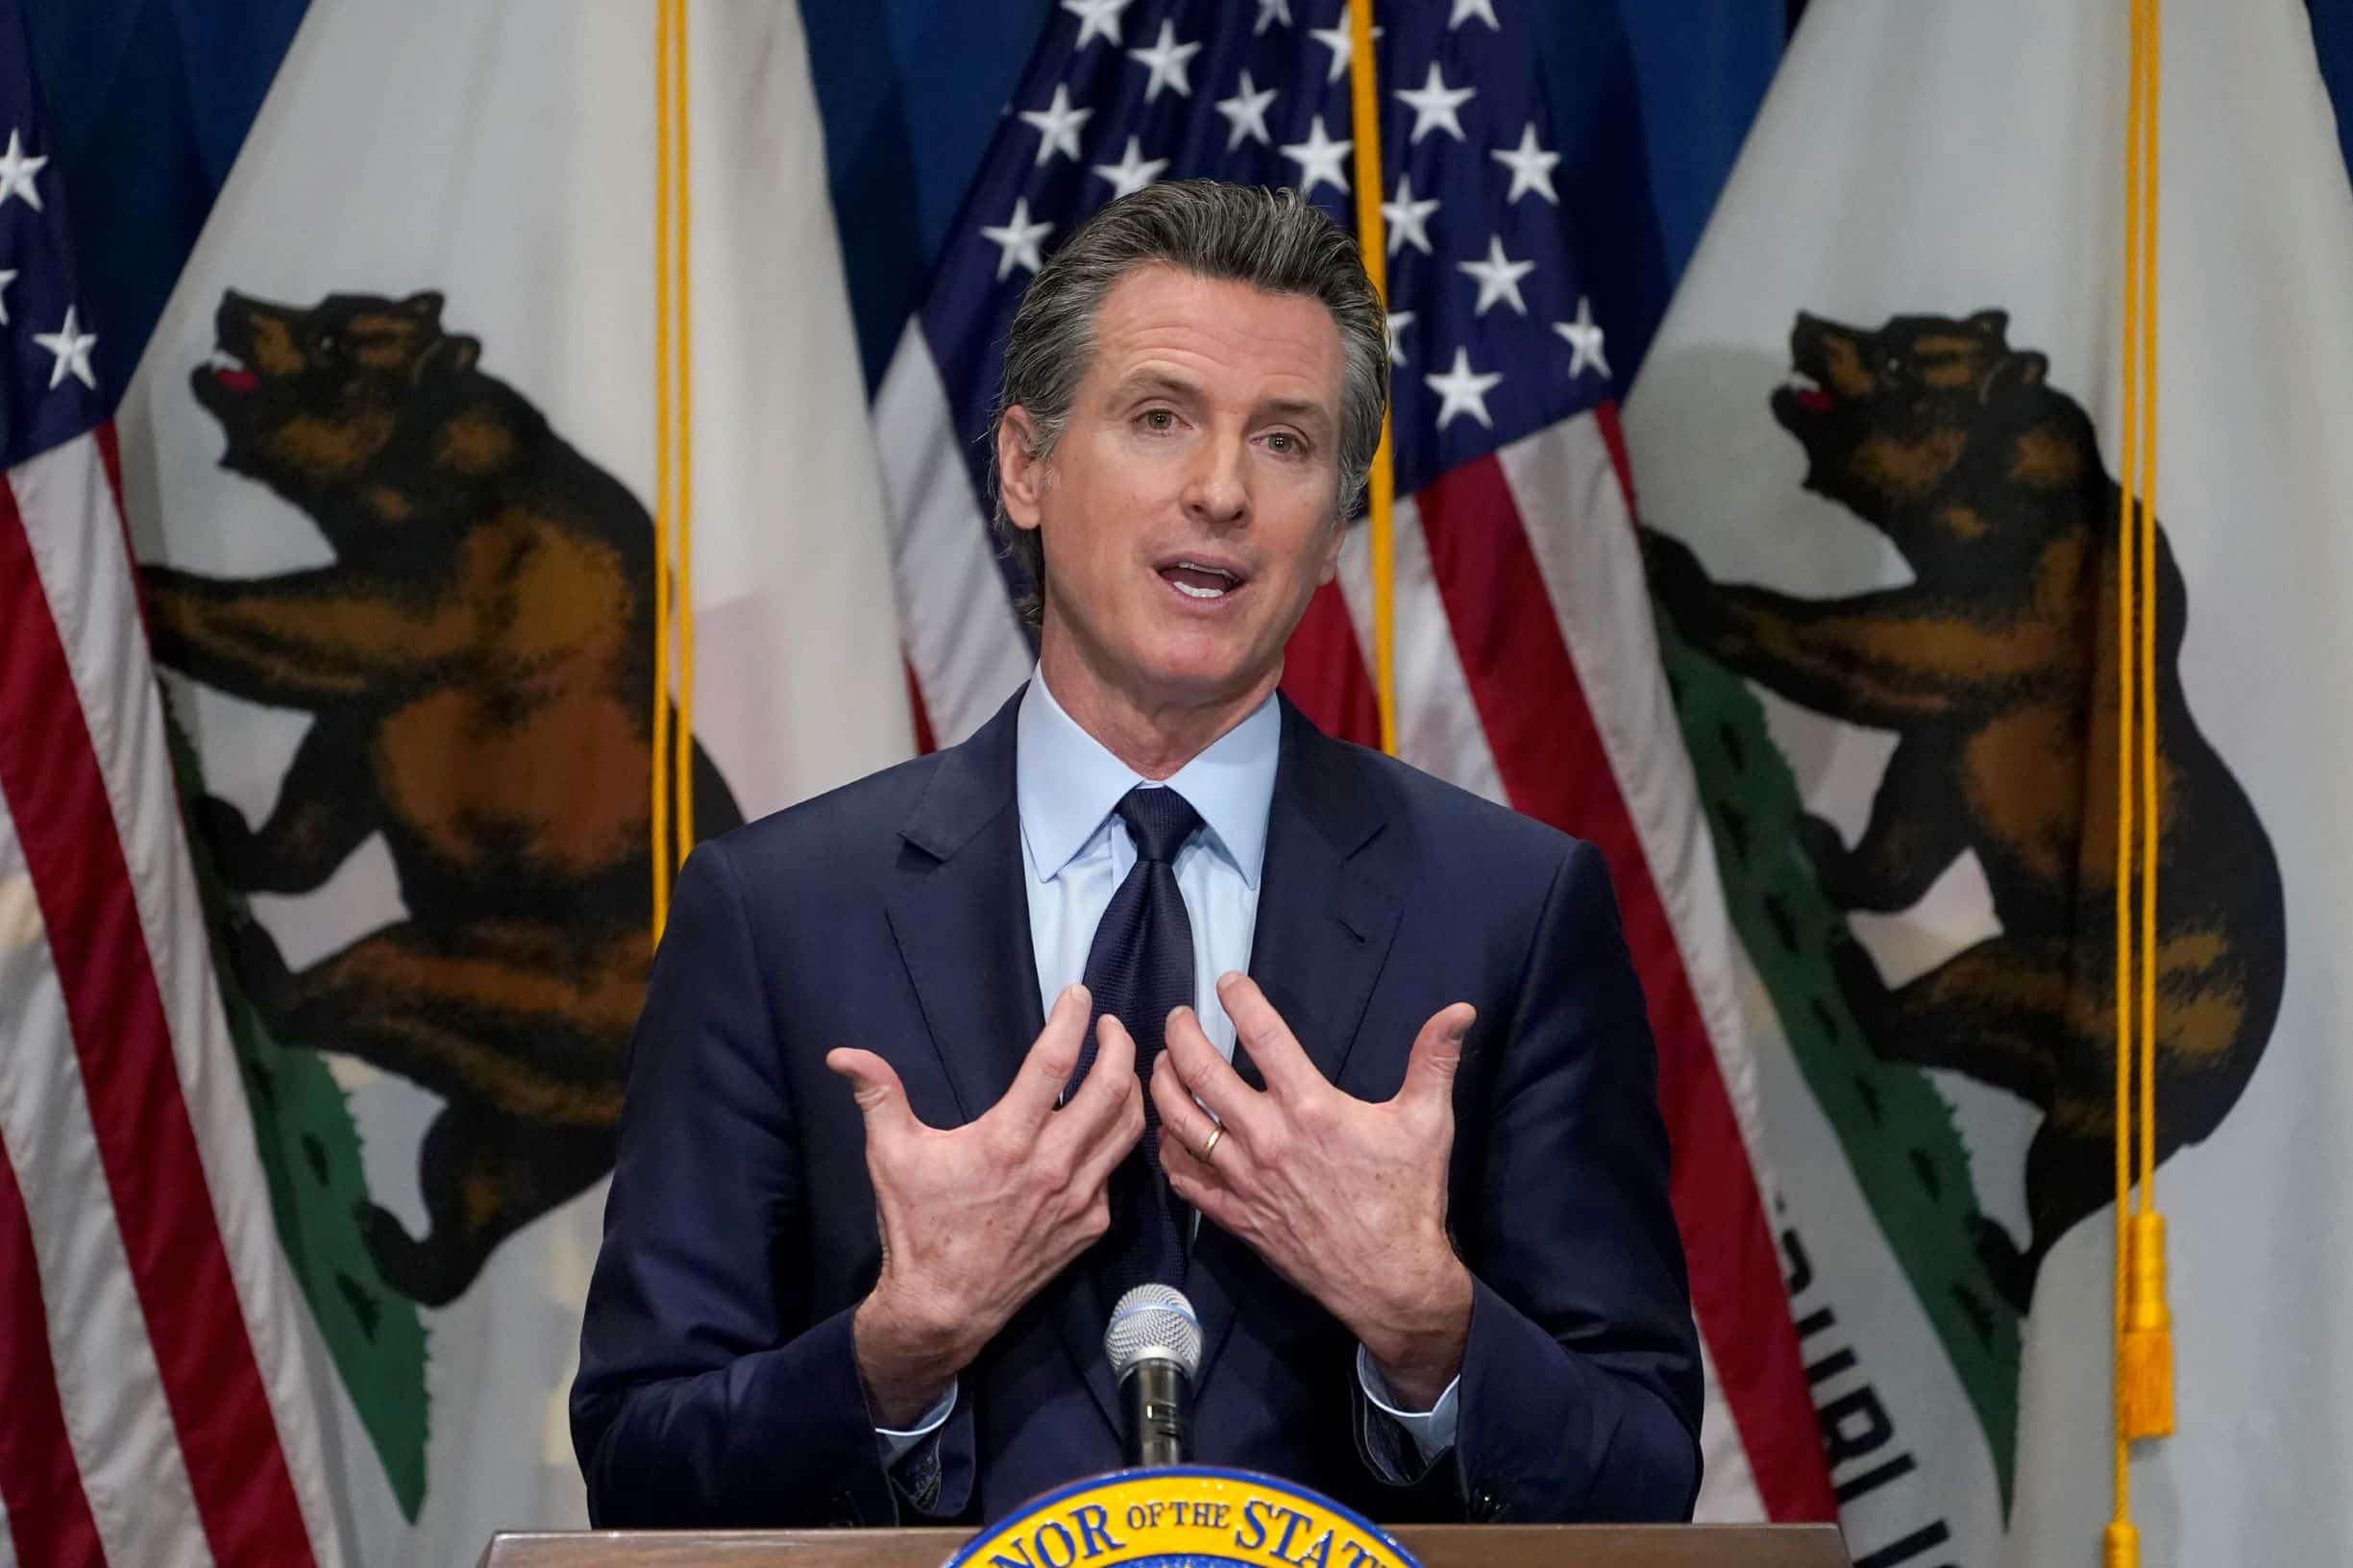 California Sets Date for Recall Election Targeting Newsom